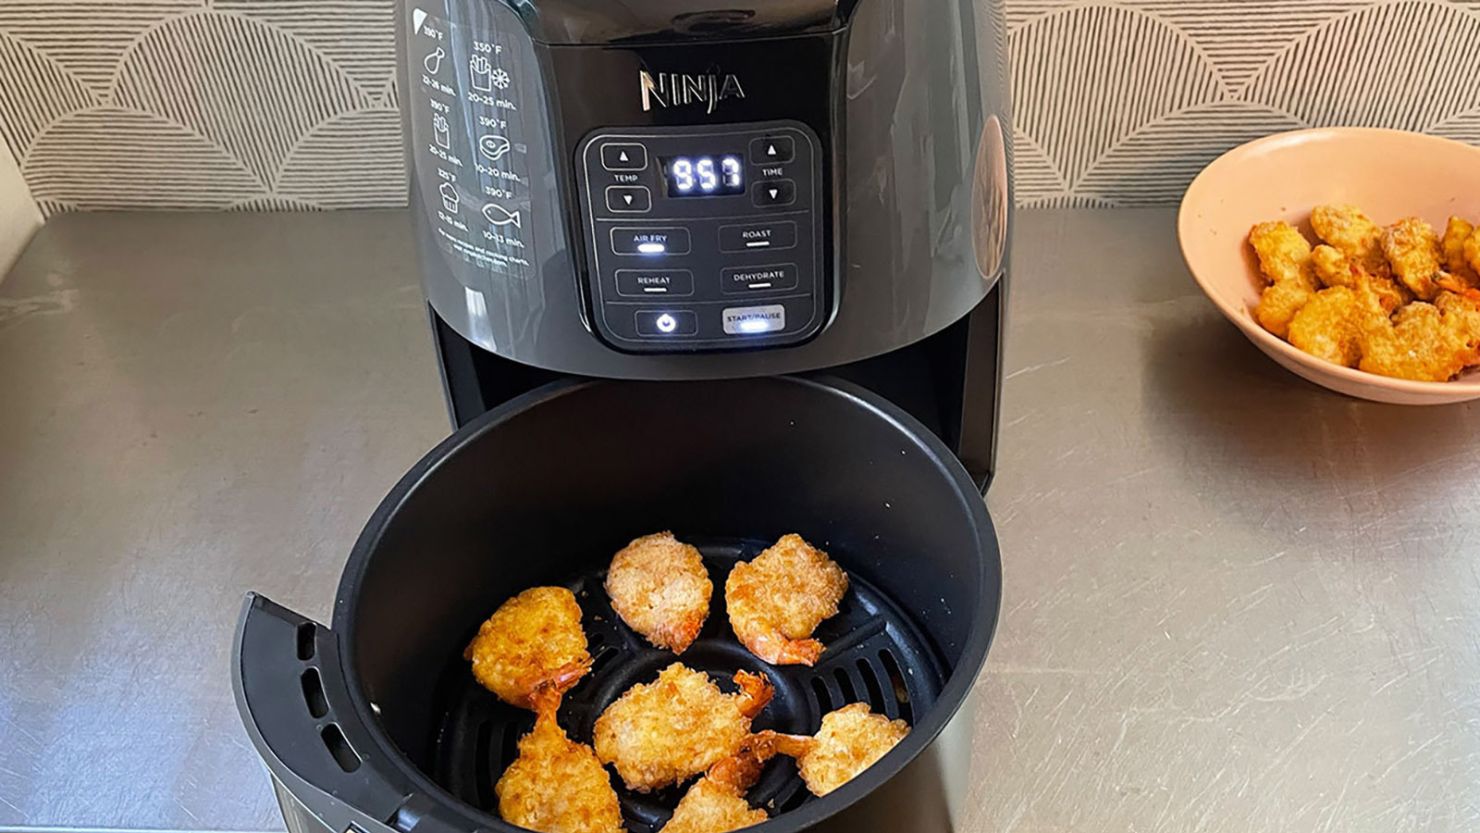 Ninja vs Cosori - who makes the best air fryers and ovens?